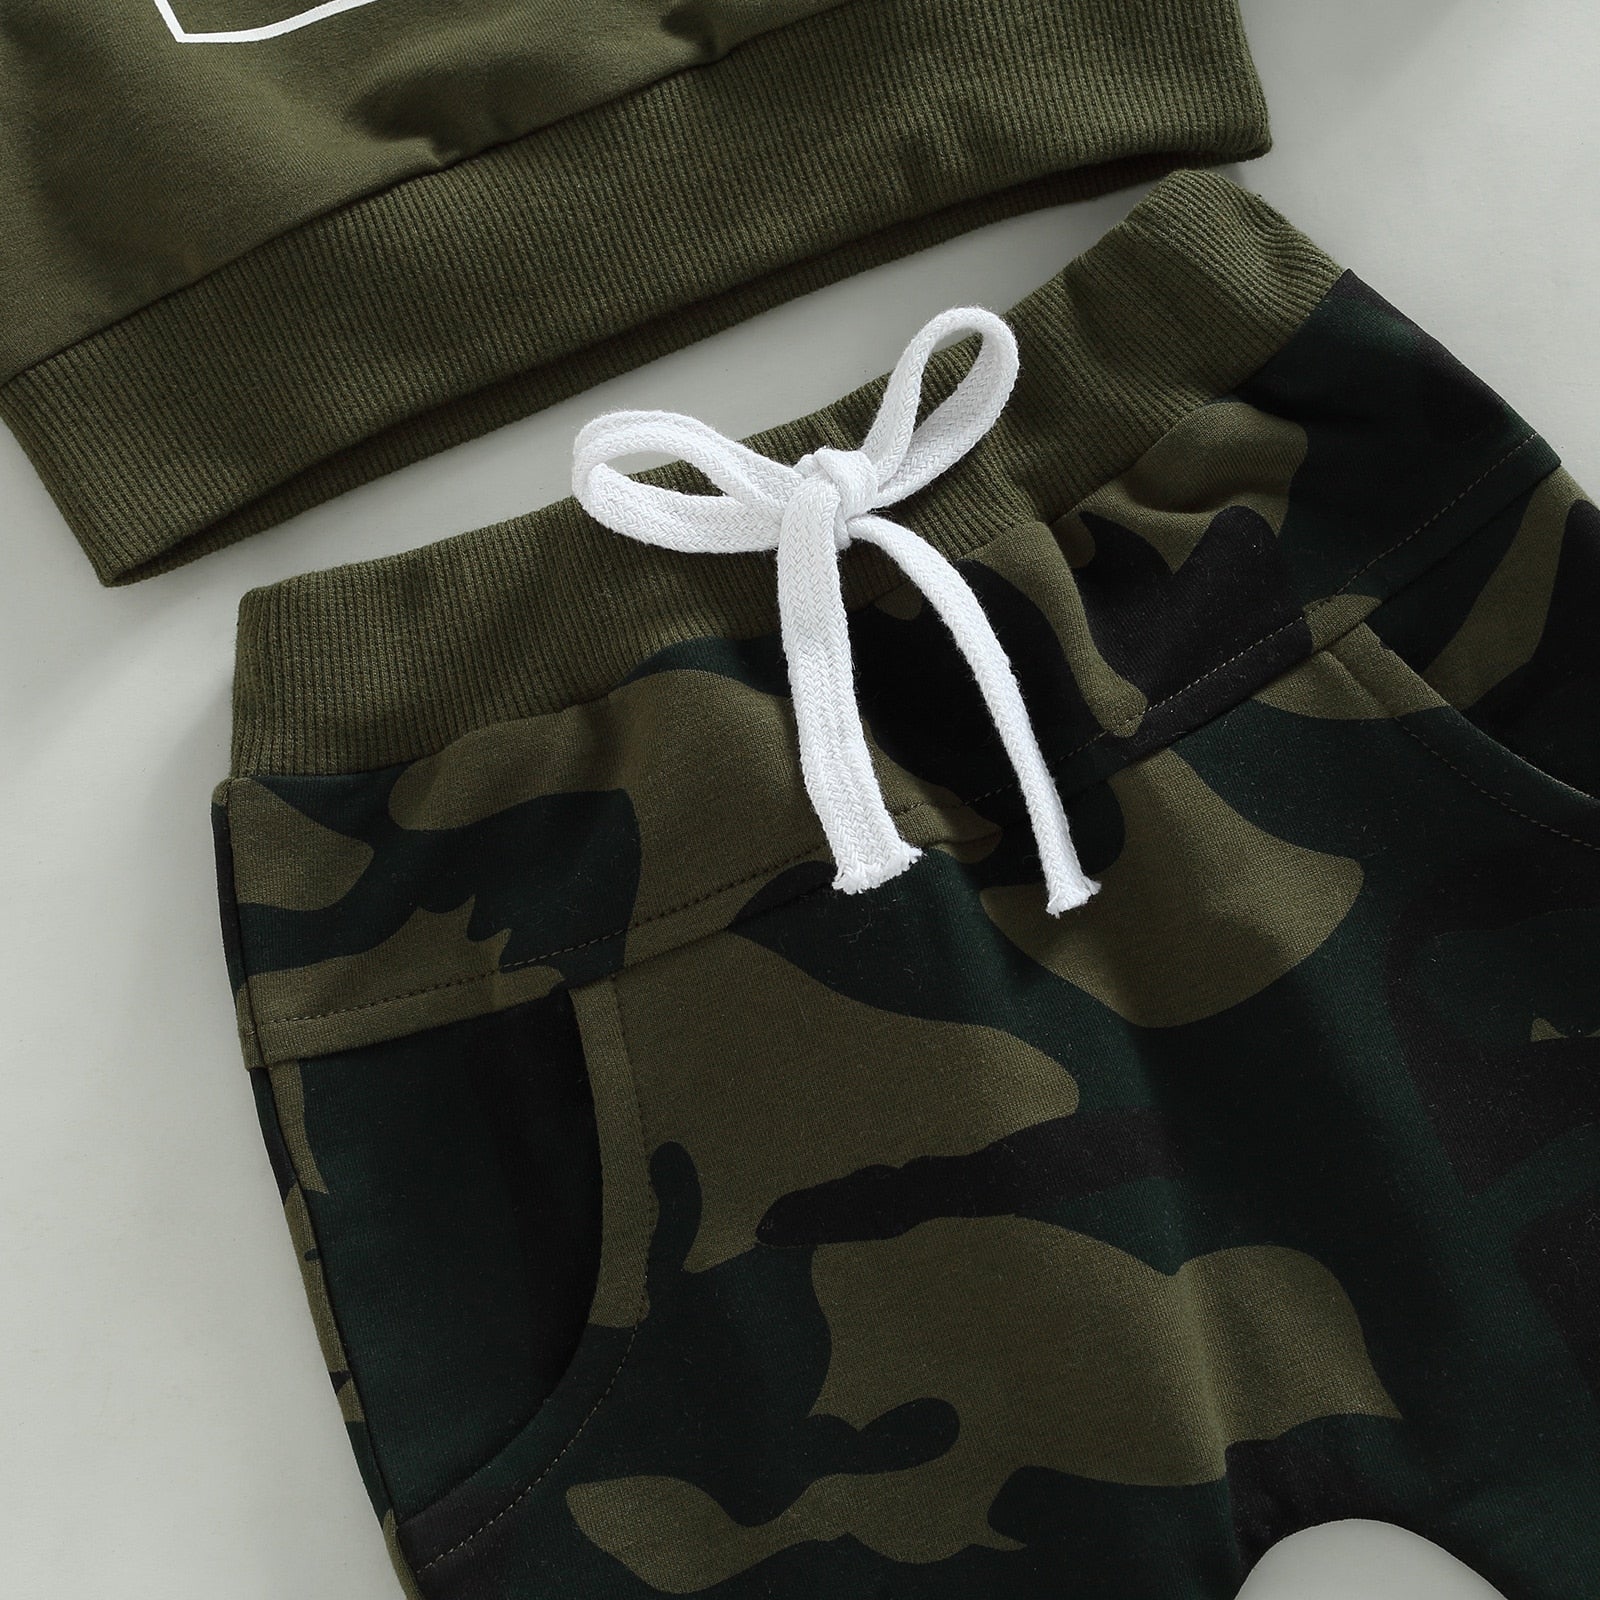 Little Bubs Club Camo Baby Clothing Set